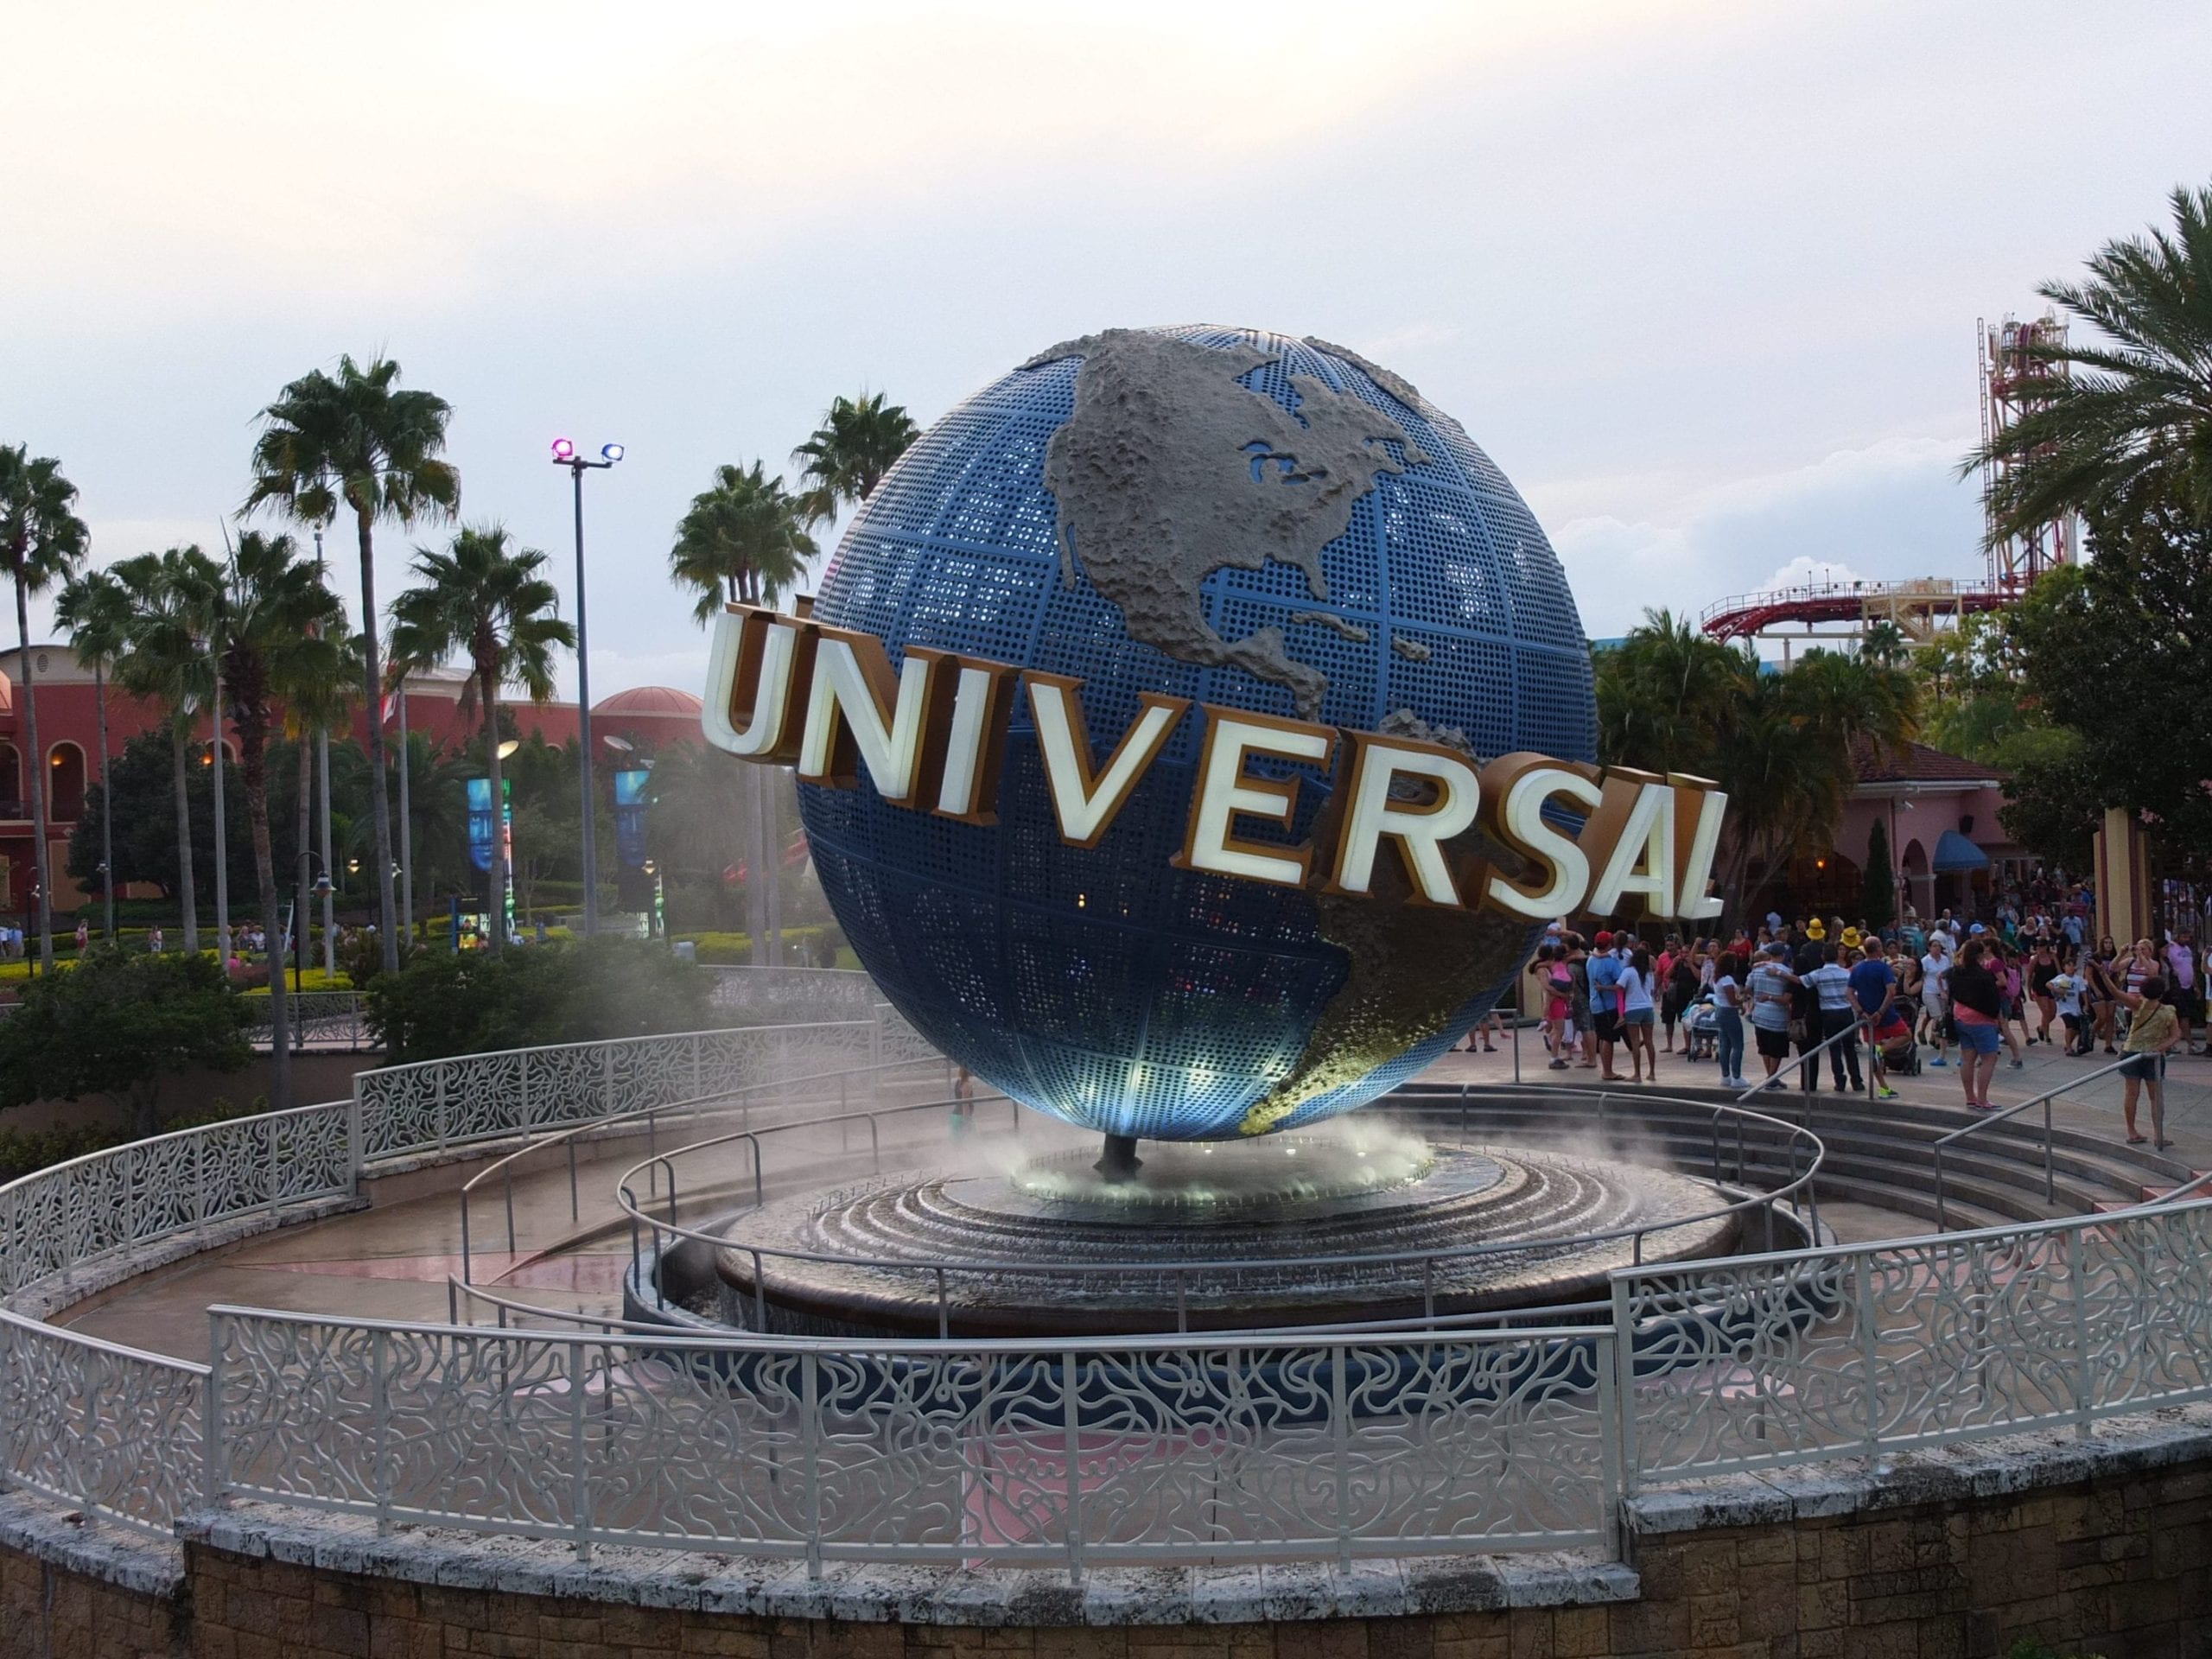 Top 20 Tips to Help You Maximize Your Time at Universal Orlando Resort